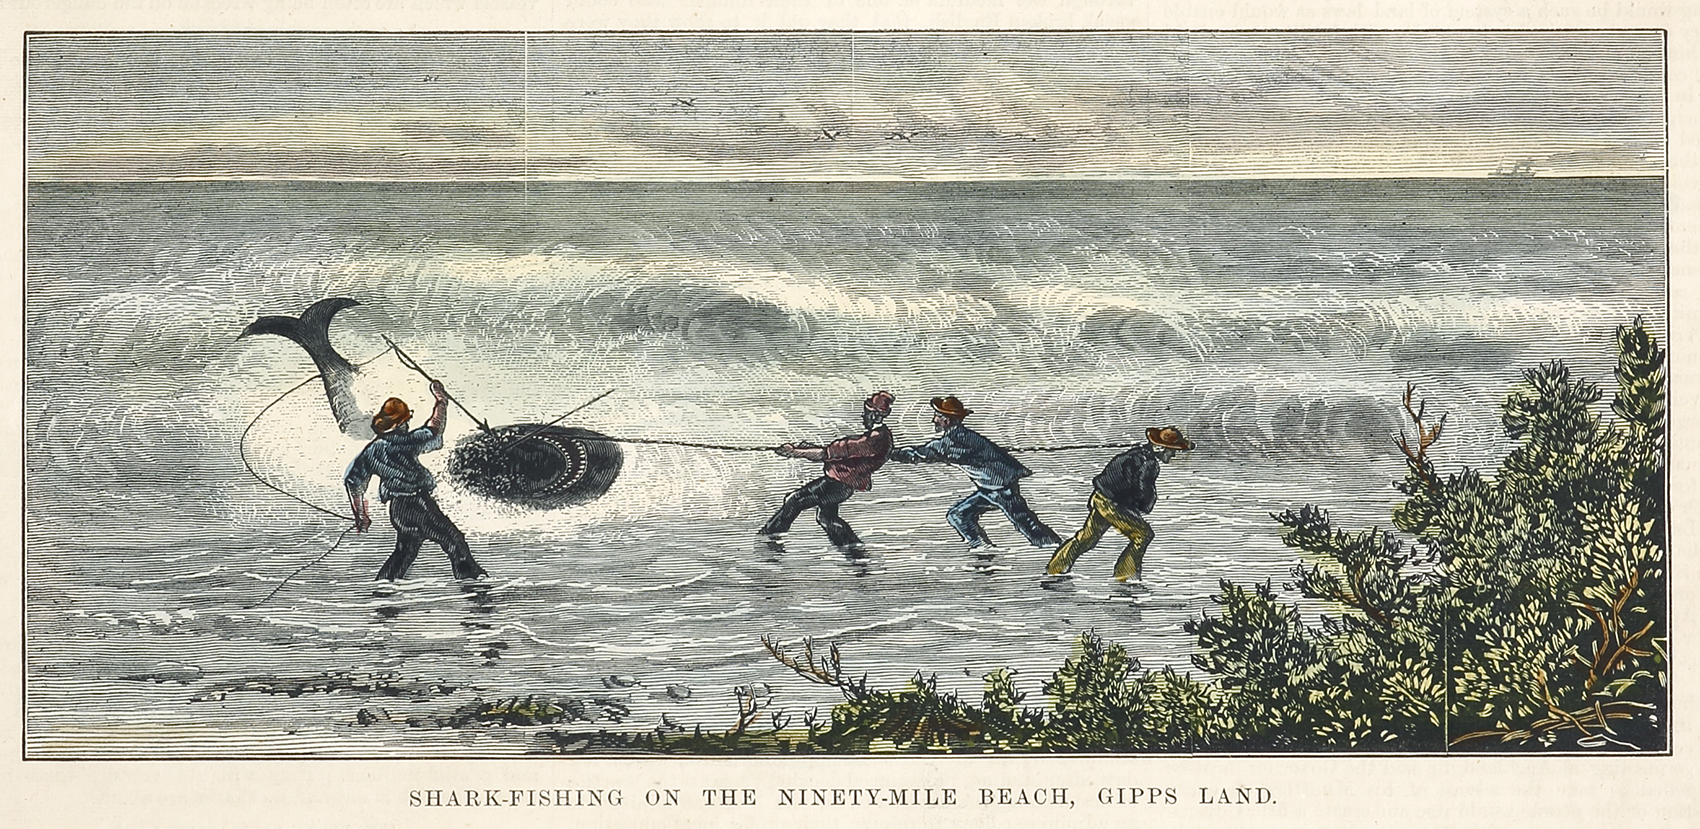 Shark-Fishing on the Ninety-mile Beach, Gipps Land. - Antique View from 1878